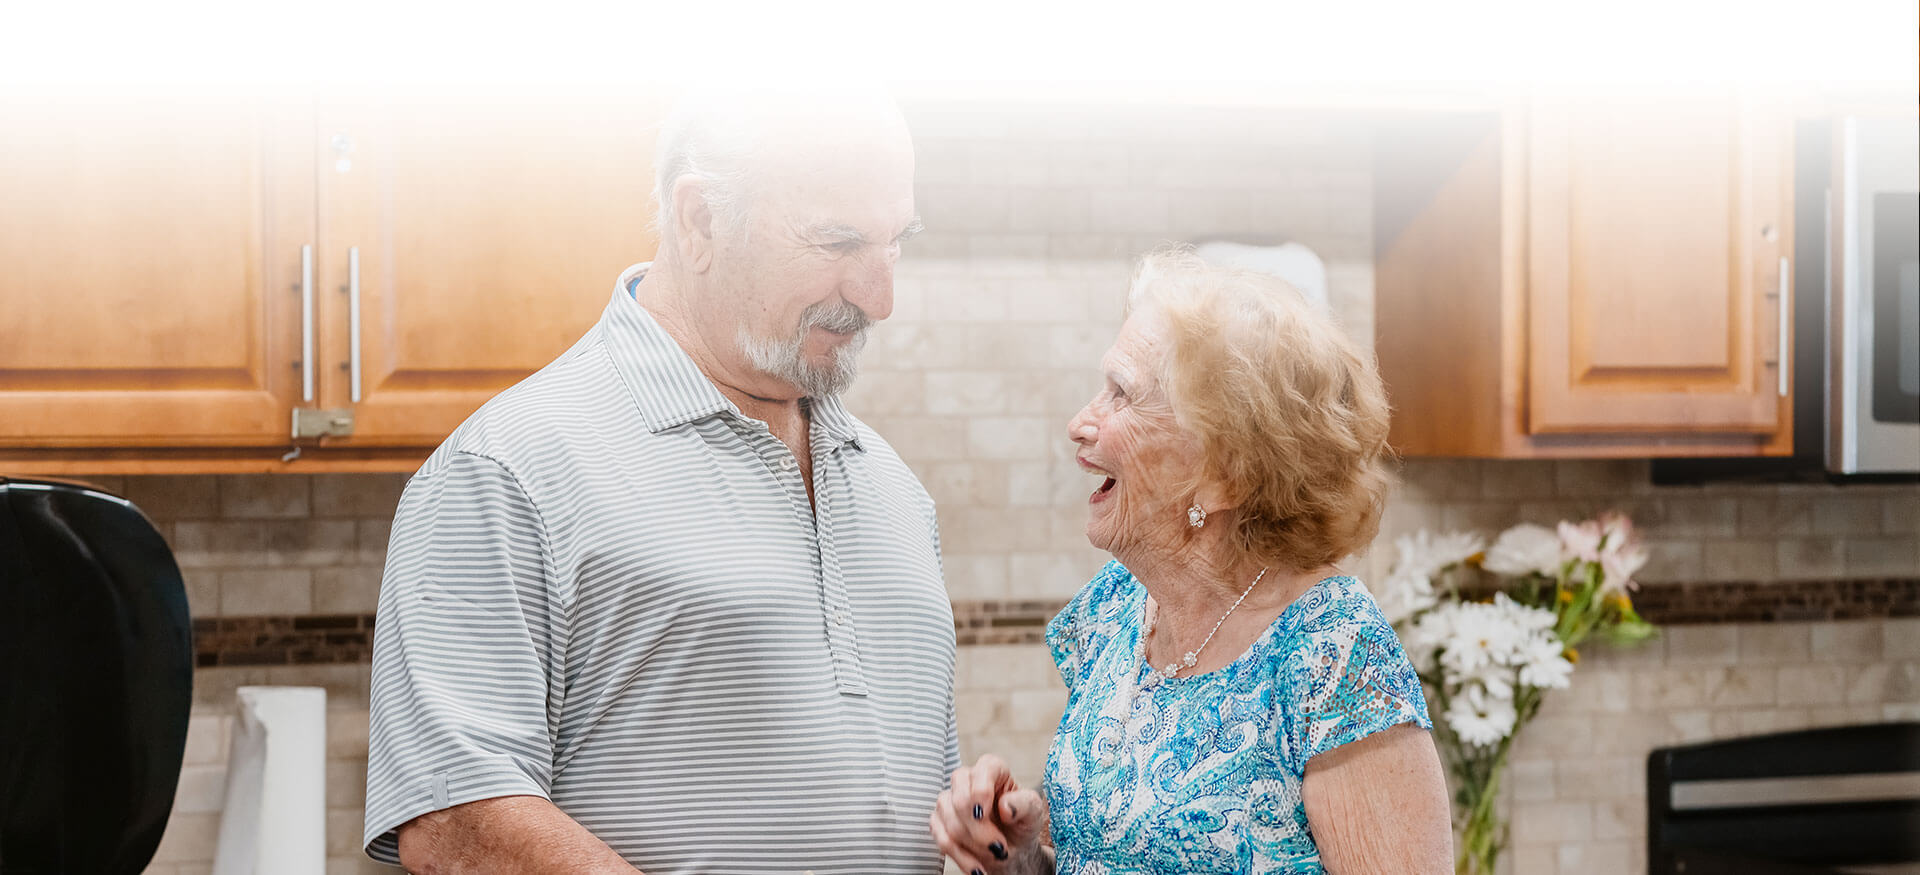 A senior couple laugh together in a kitchen